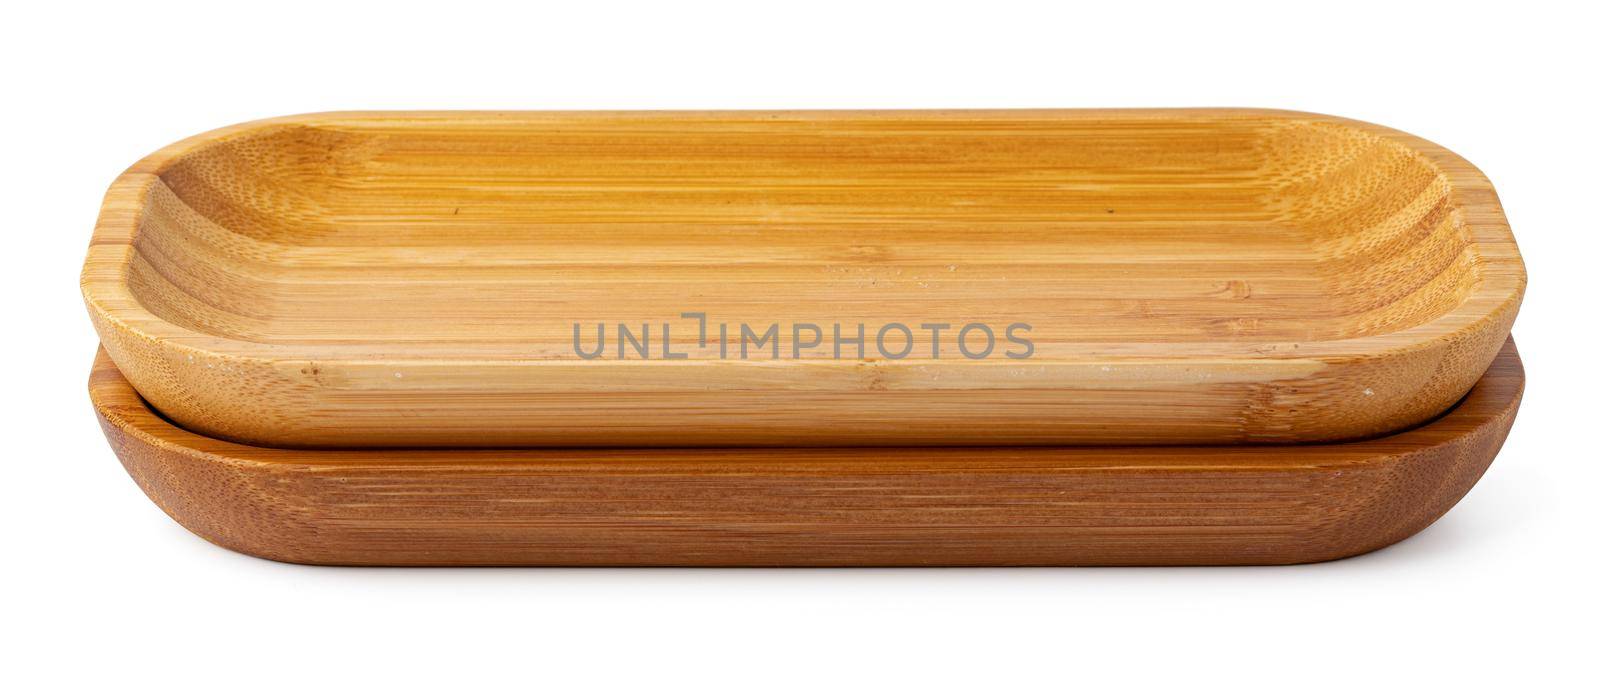 Wooden plate isolated on white background, close up by Fabrikasimf